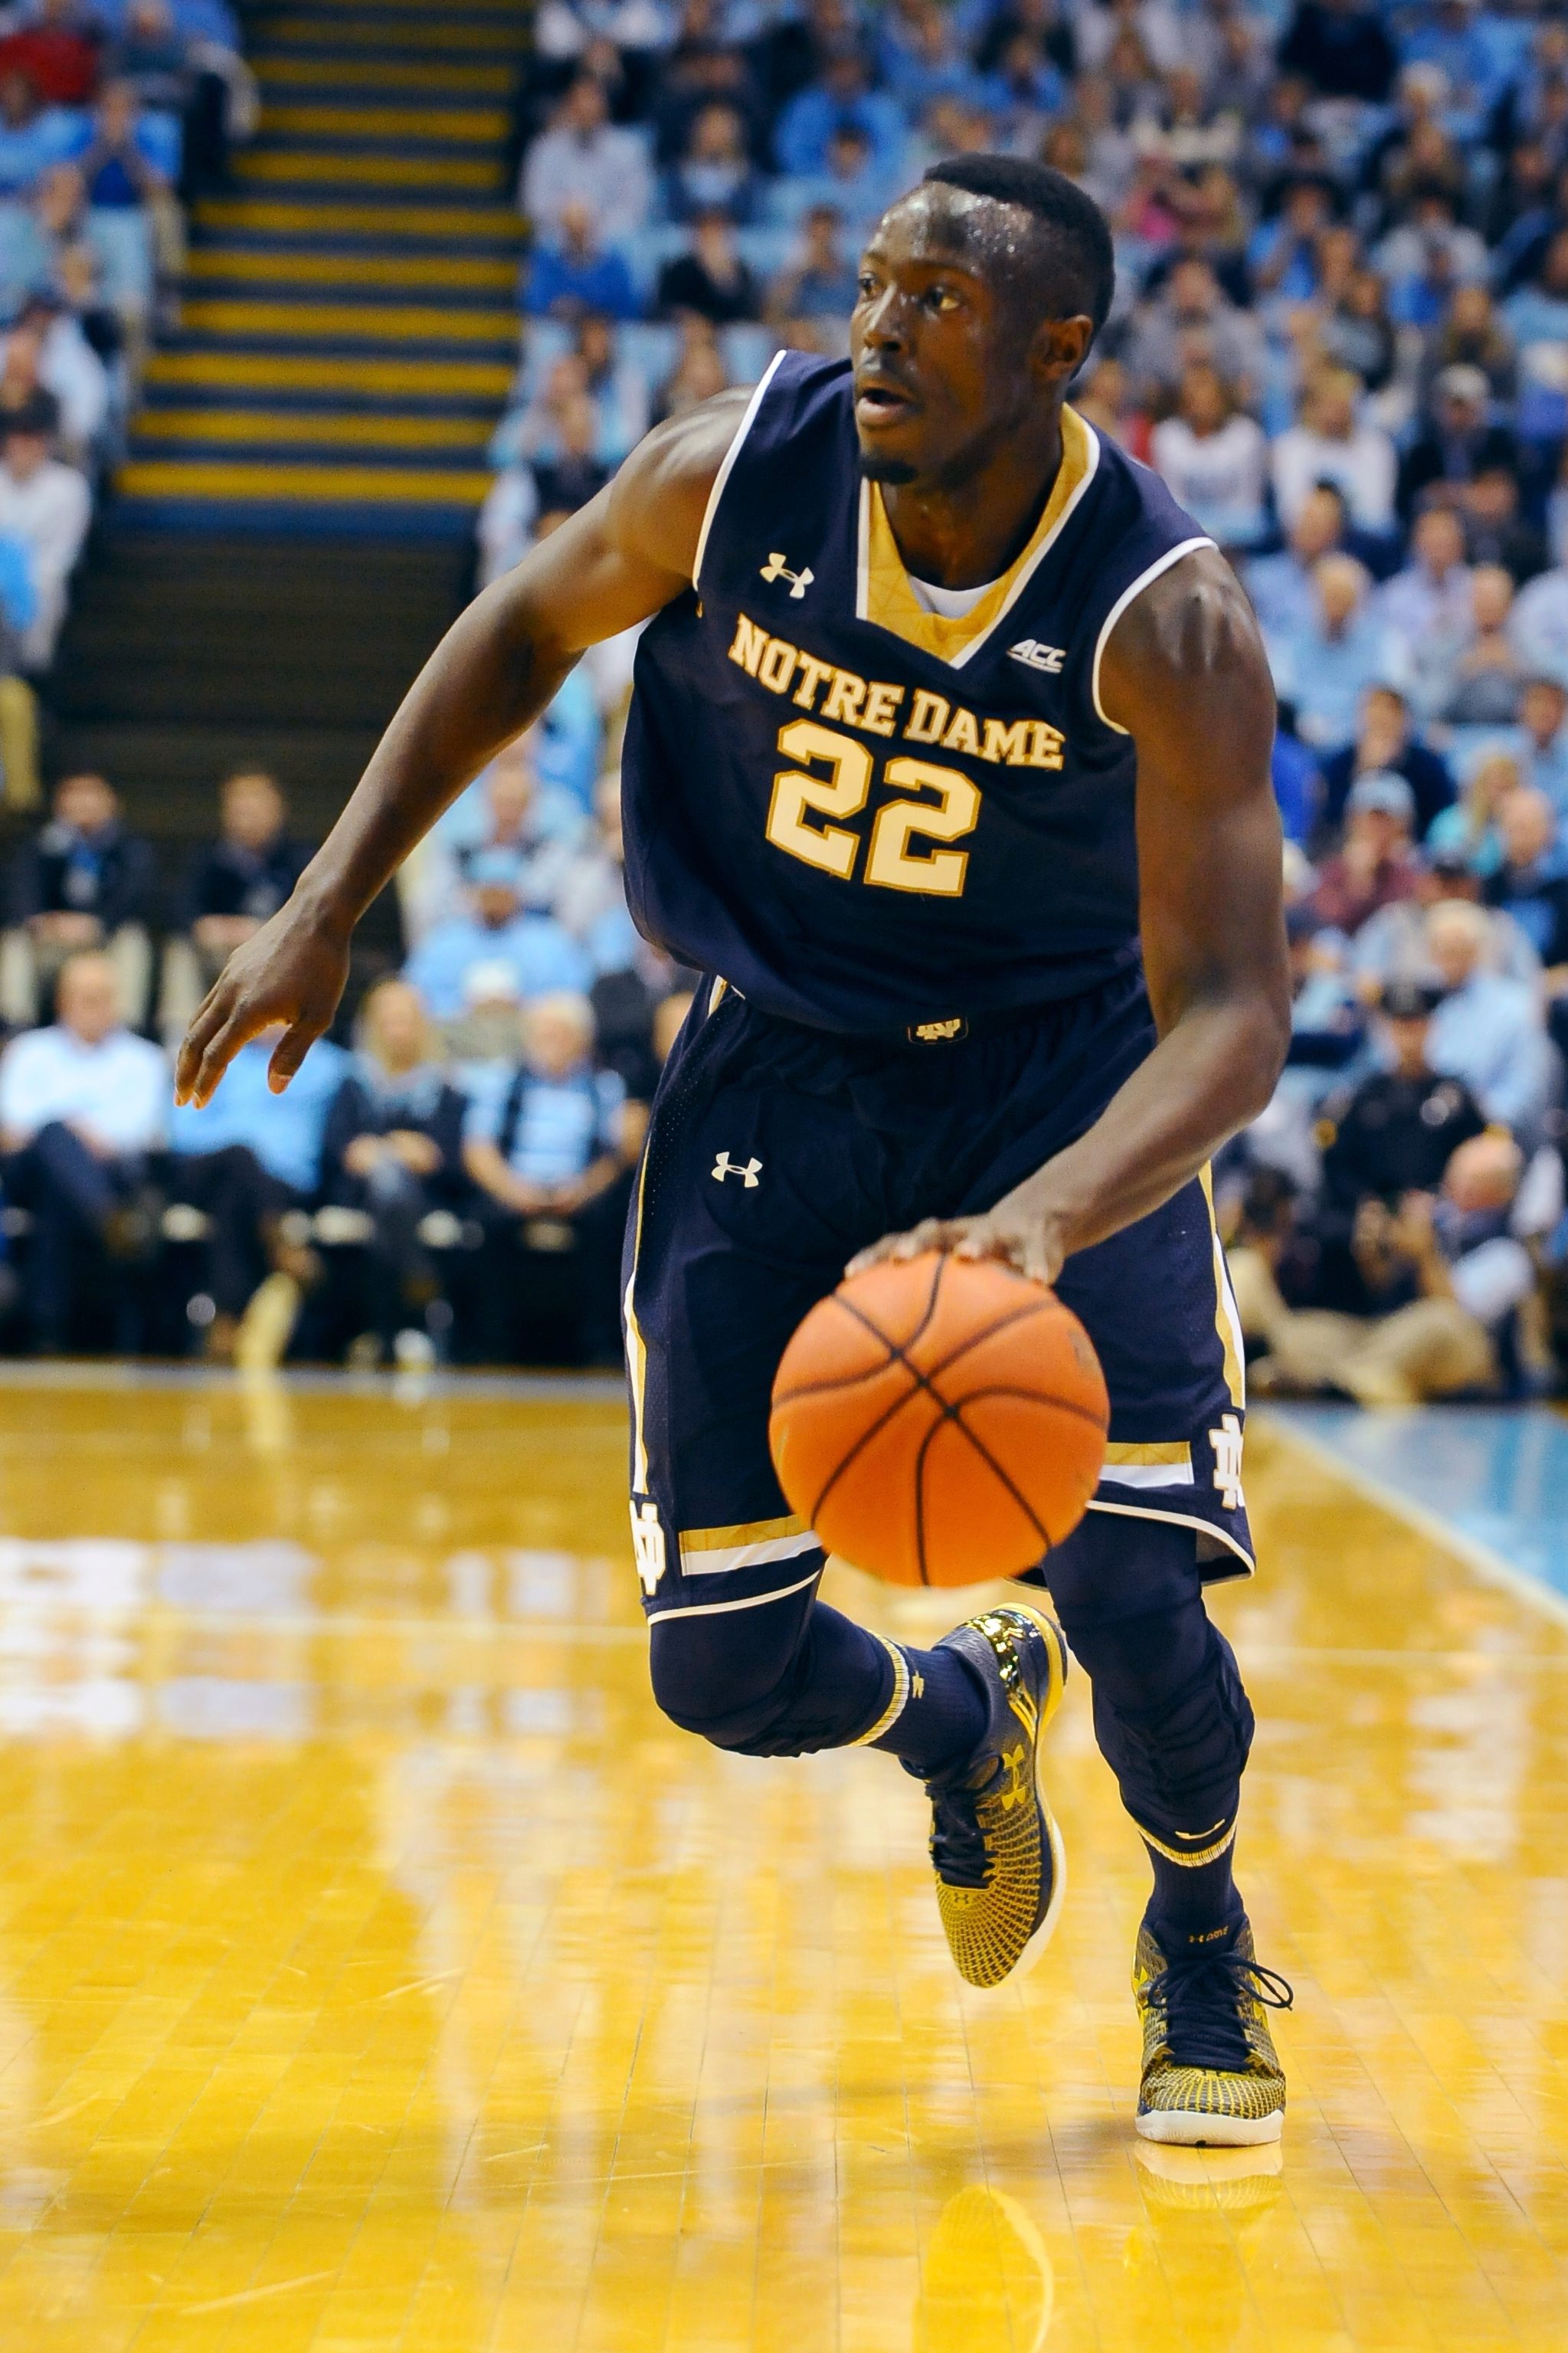 005 January 2015: Mike Brey wants his Notre Dame players to establish a pattern of consistent success in the Atlantic Coast Conference. Winning at North Carolina in Year 2 is a big step toward that goal. Zach Auguste's basket off an offensive rebound with 1:07 left helped the No. 13 Fighting Irish hold off the No. 18 Tar Heels 71-70 on Monday night at Dean E. Smith Center in Chapel Hill, North Carolina. Credit - Tim Cowie/Tim Cowie Photography